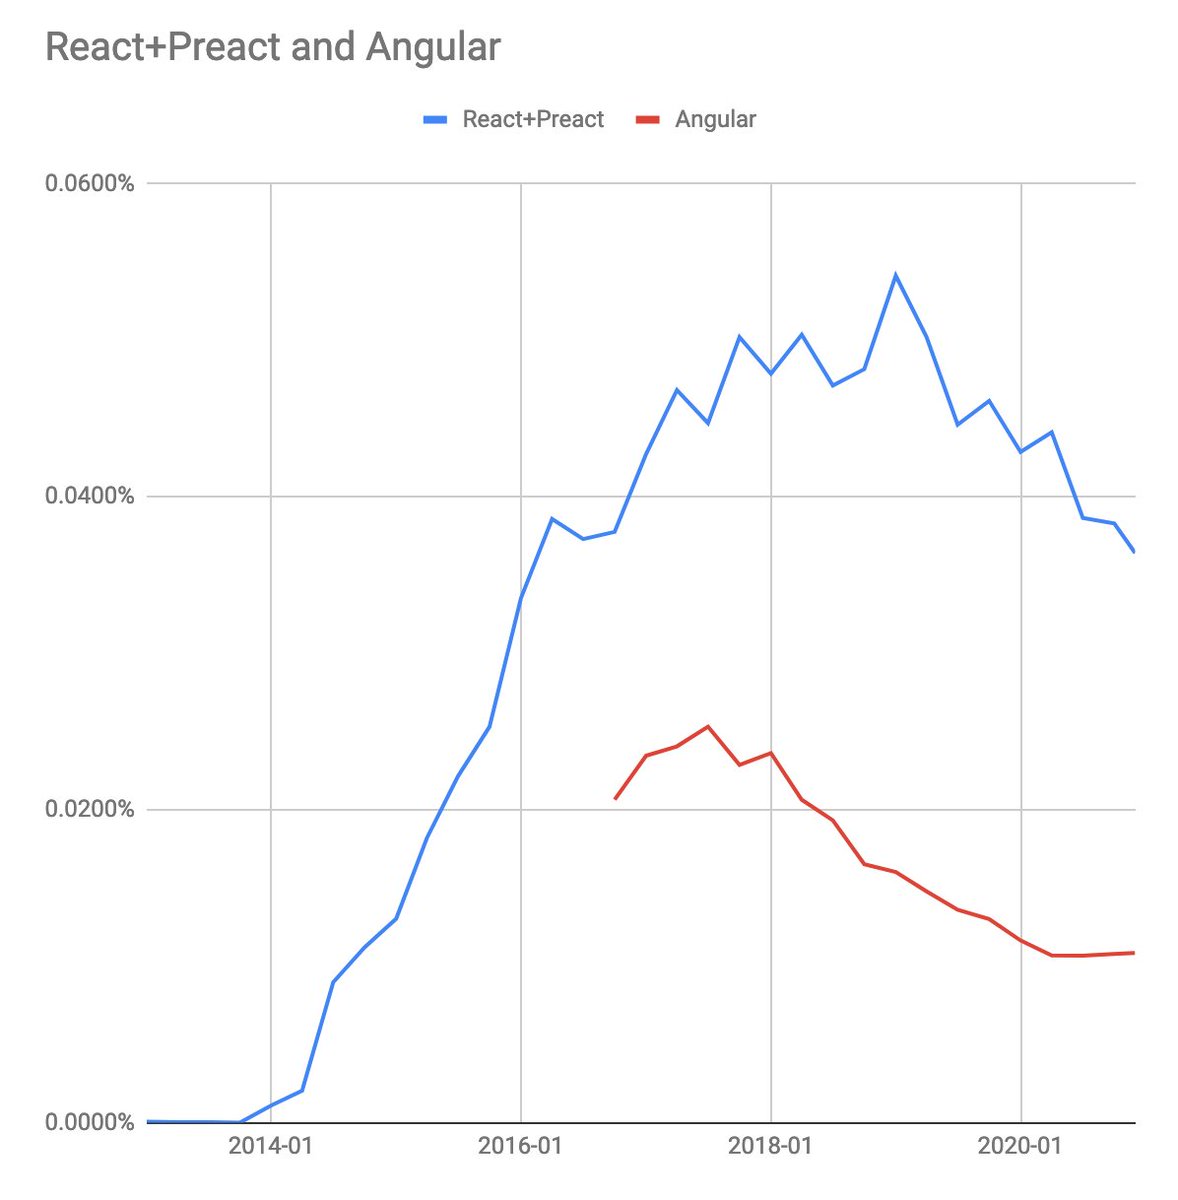 It's not a revival in Angular. This is both AngularJS + Angular 2+, which continue their long decline.